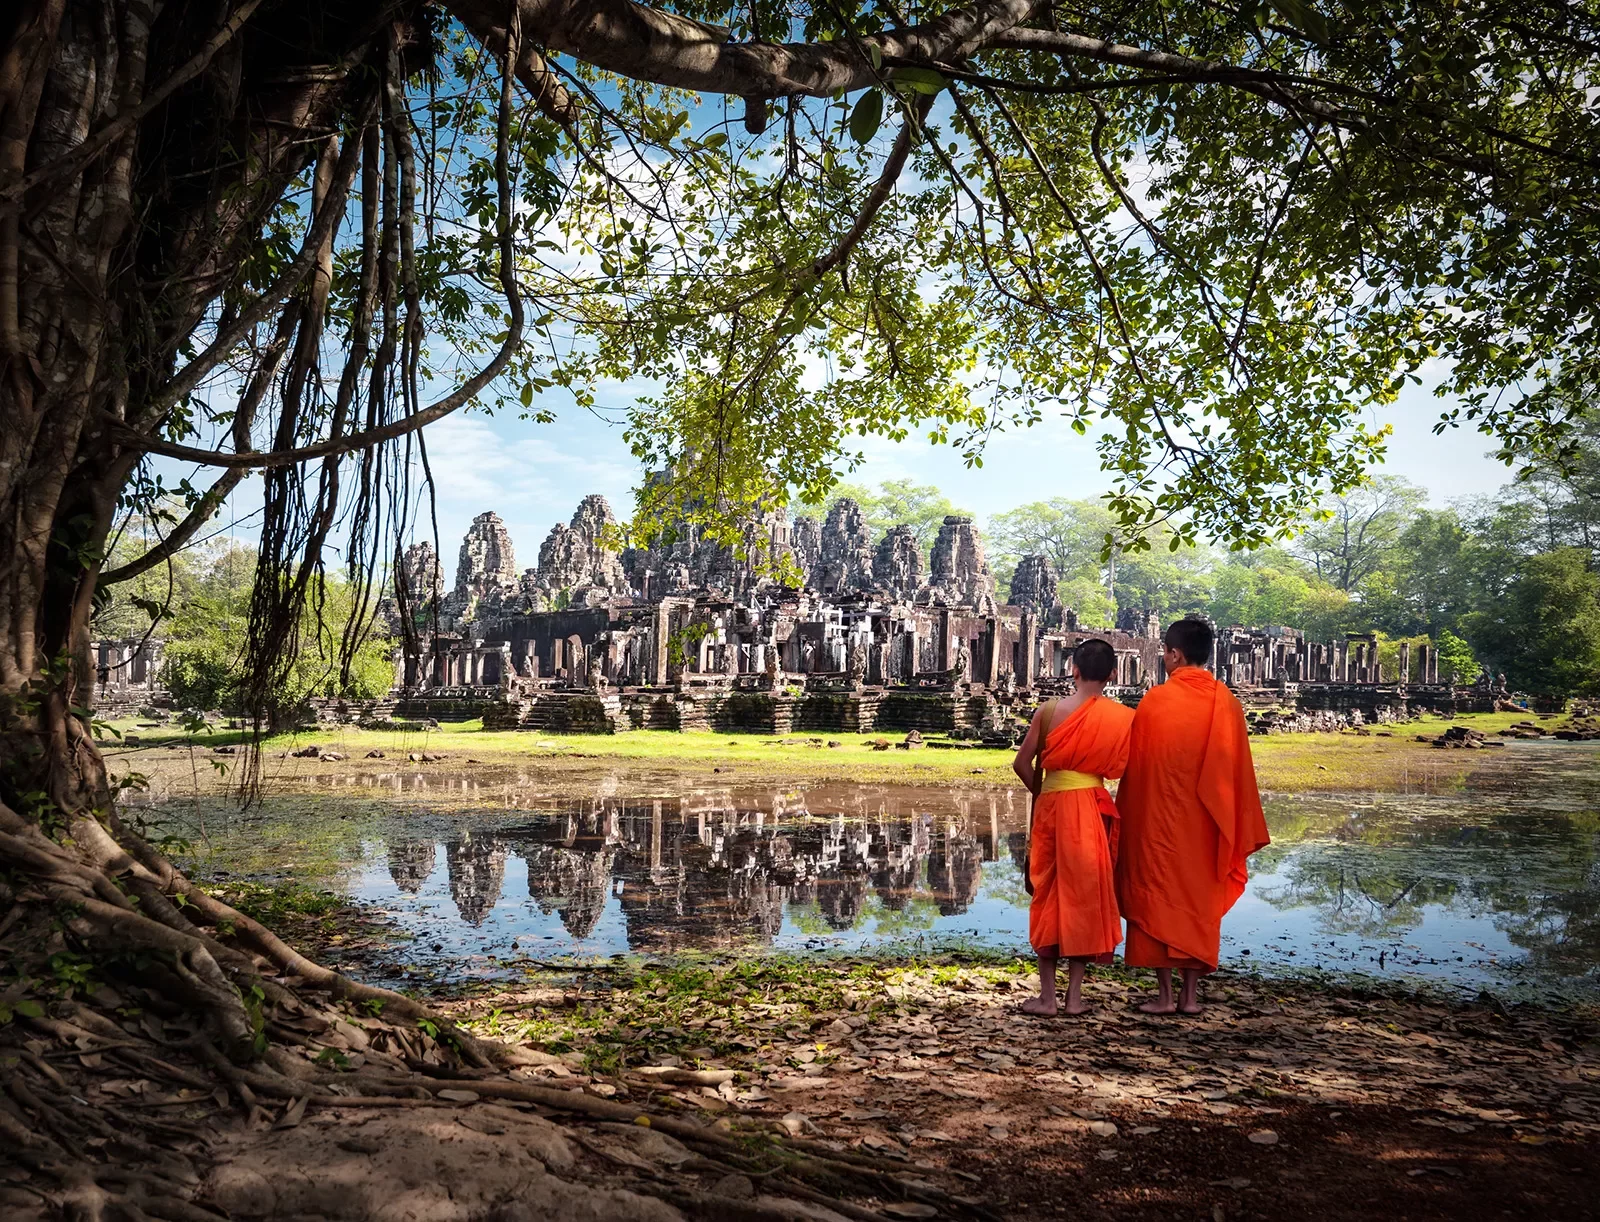 Two monks in traditional orange robes looking at Angkor Wat in Cambodia